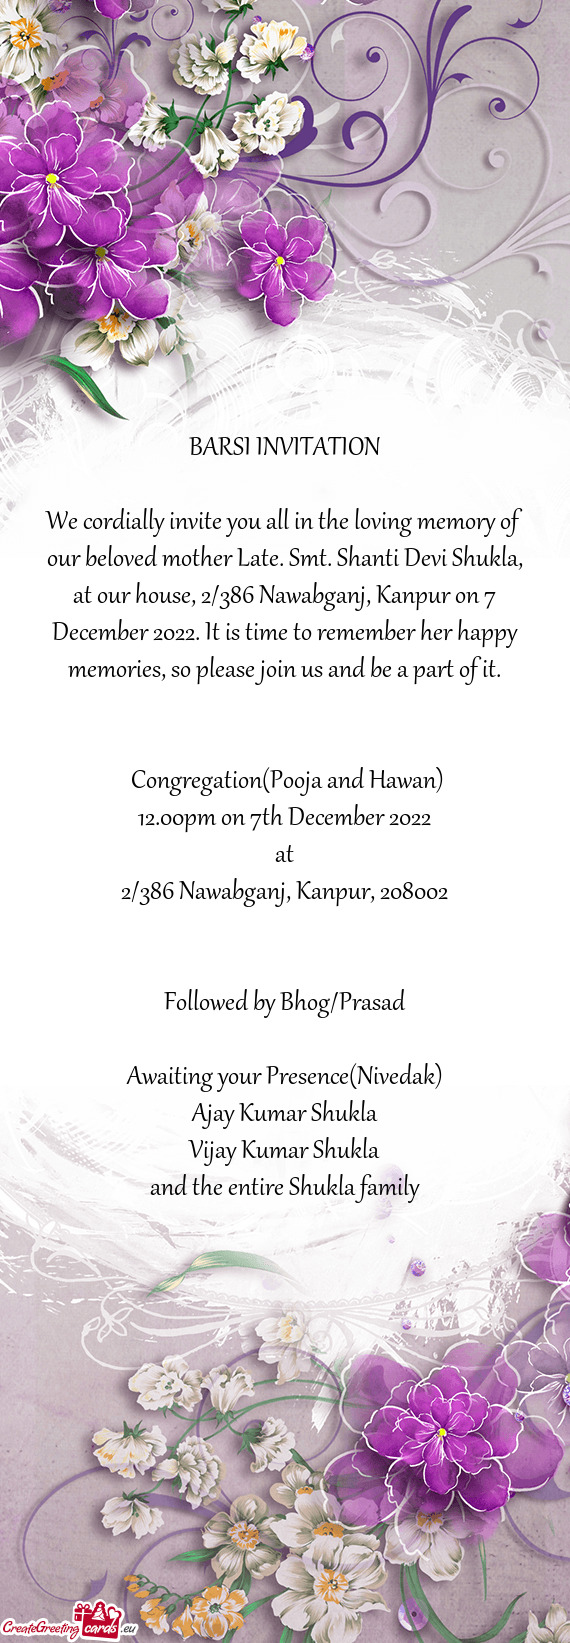 We cordially invite you all in the loving memory of our beloved mother Late. Smt. Shanti Devi Shukla